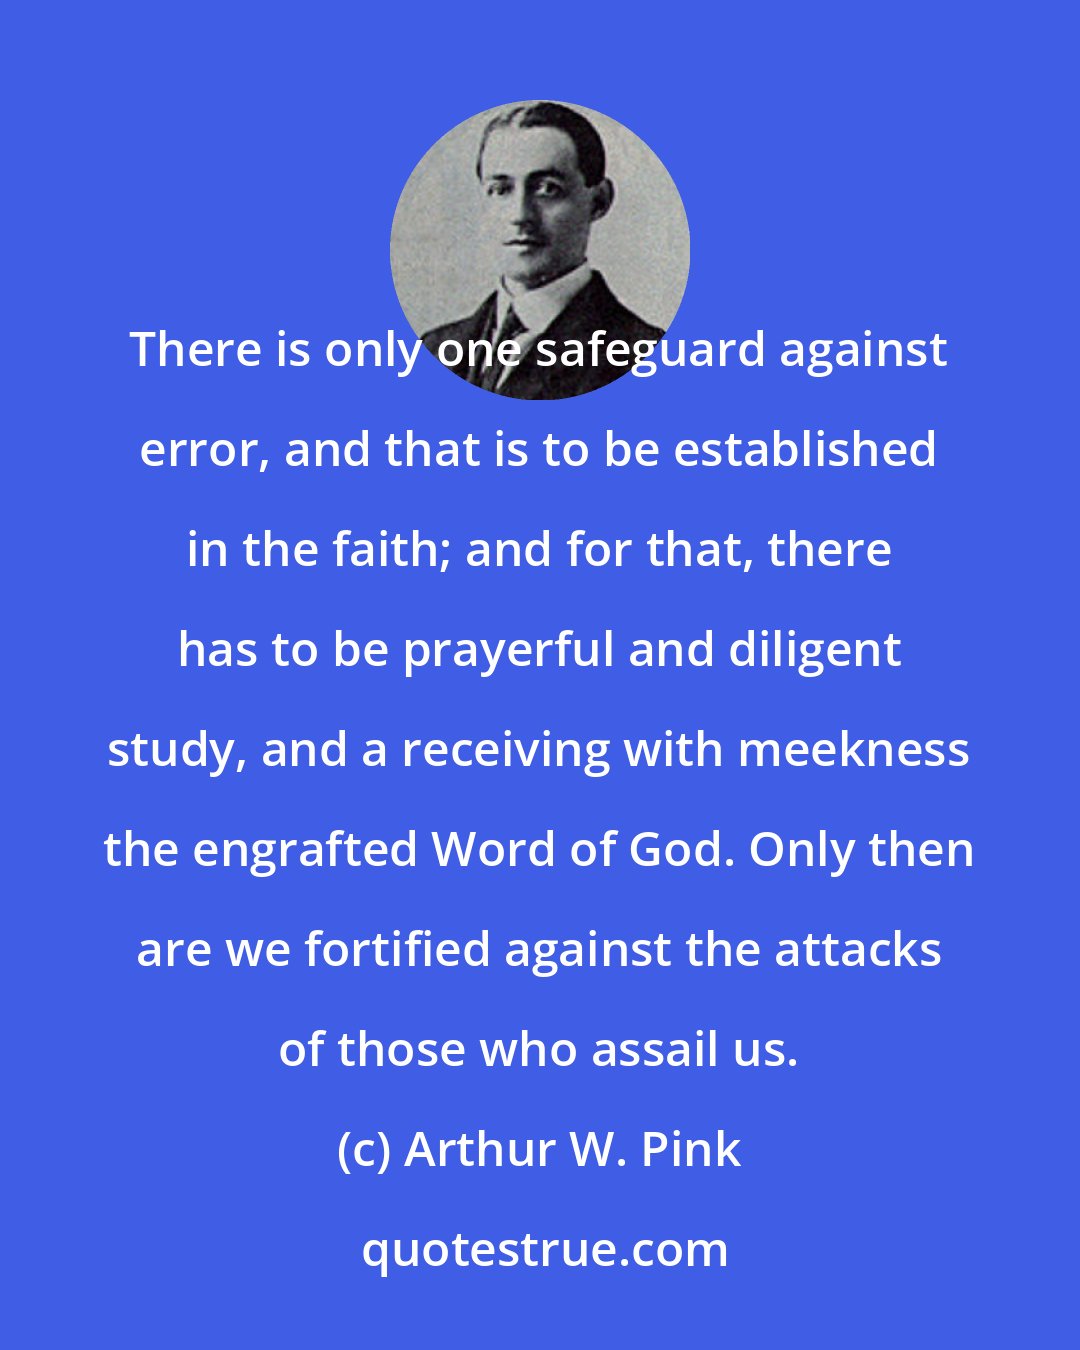 Arthur W. Pink: There is only one safeguard against error, and that is to be established in the faith; and for that, there has to be prayerful and diligent study, and a receiving with meekness the engrafted Word of God. Only then are we fortified against the attacks of those who assail us.